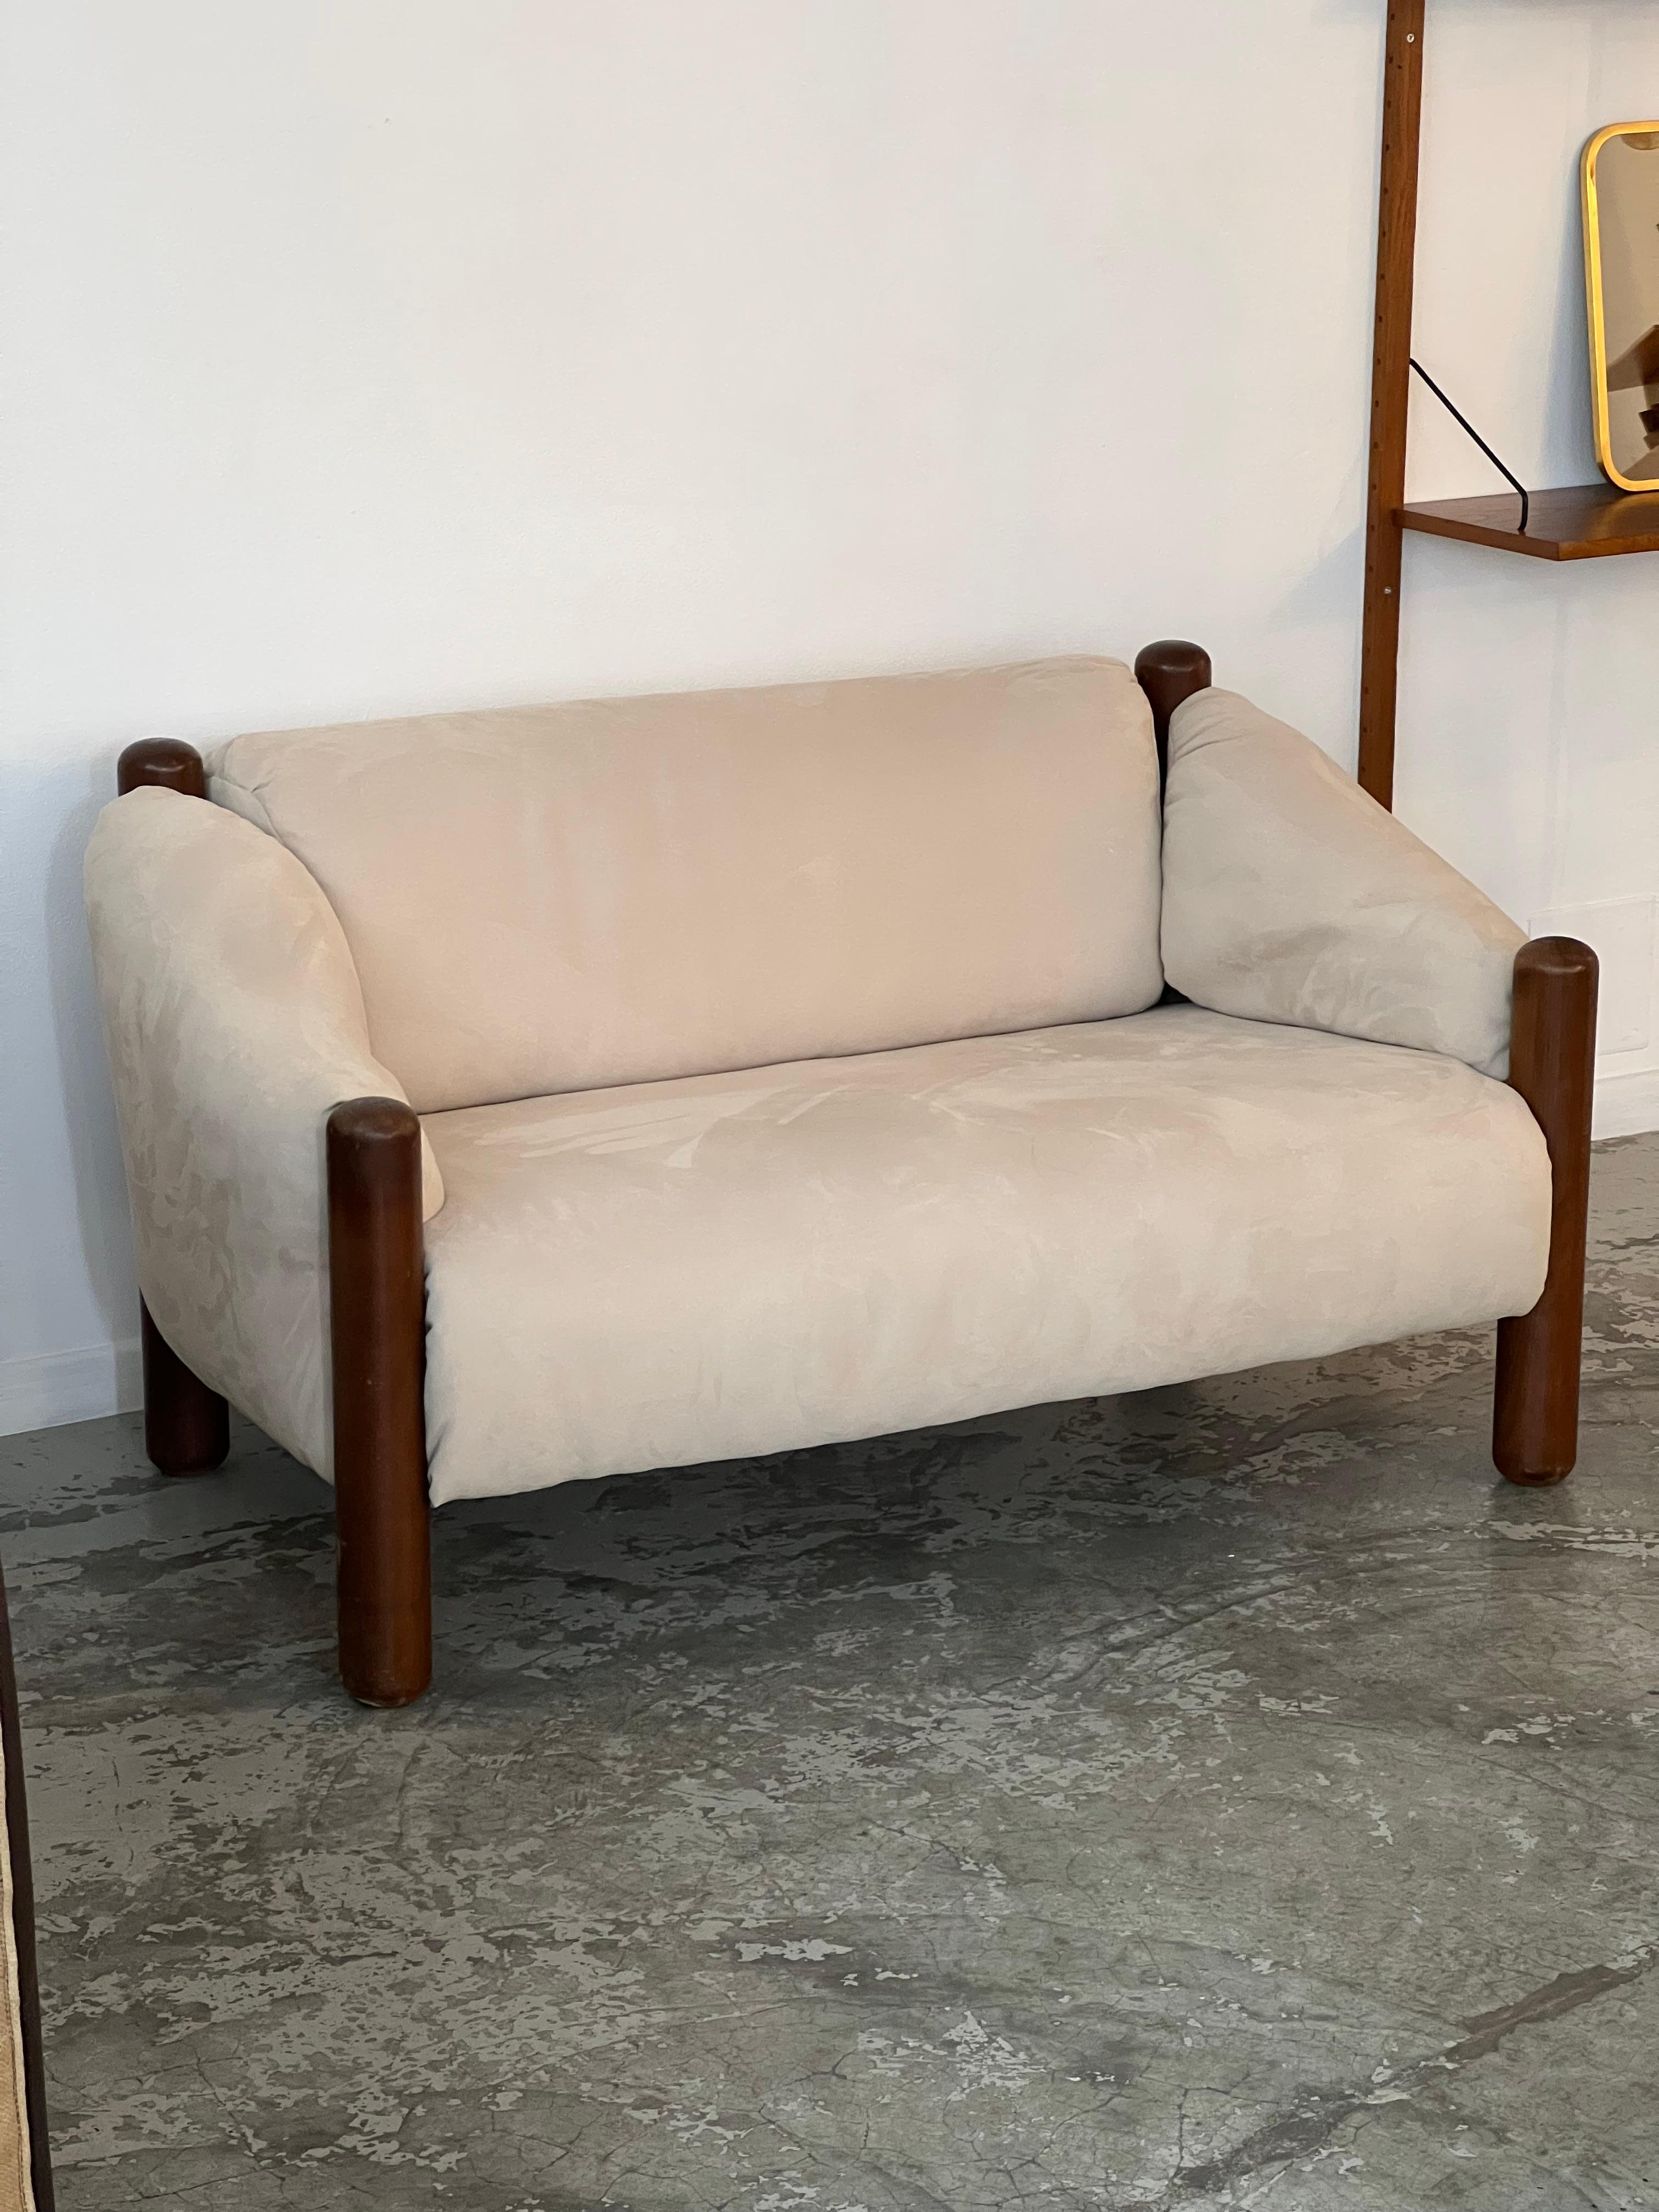 This small Scandinavian sofa dates back to the 1950s. Its designer is unknown. It embodies the principles of Scandinavian design with simple and sturdy materials and a minimalist, functional aesthetic that can adapt to various interior styles.

Its